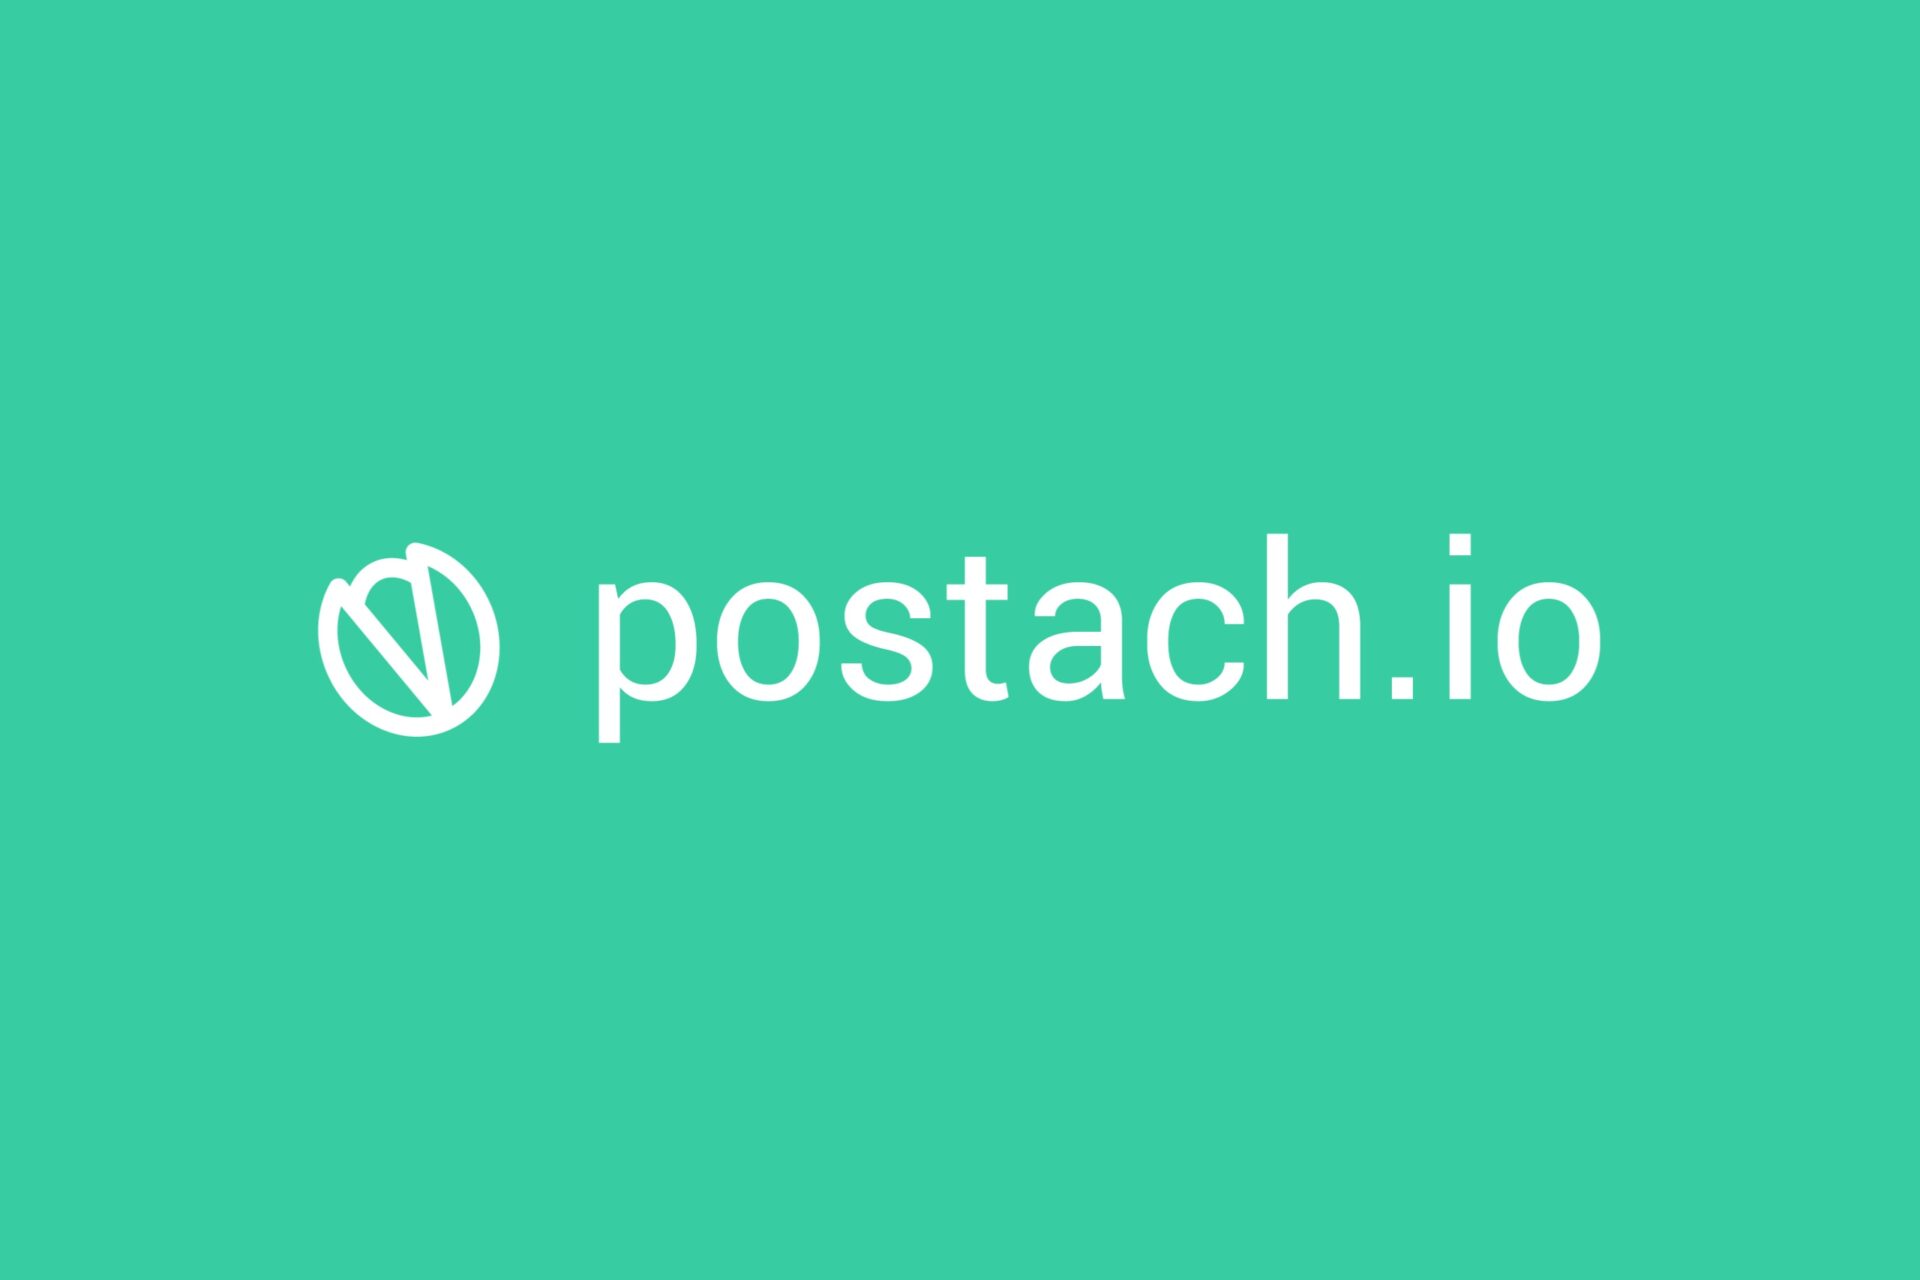 Postach.io Review: Can This Tool Replace The CMS For Your Website Or Blog?